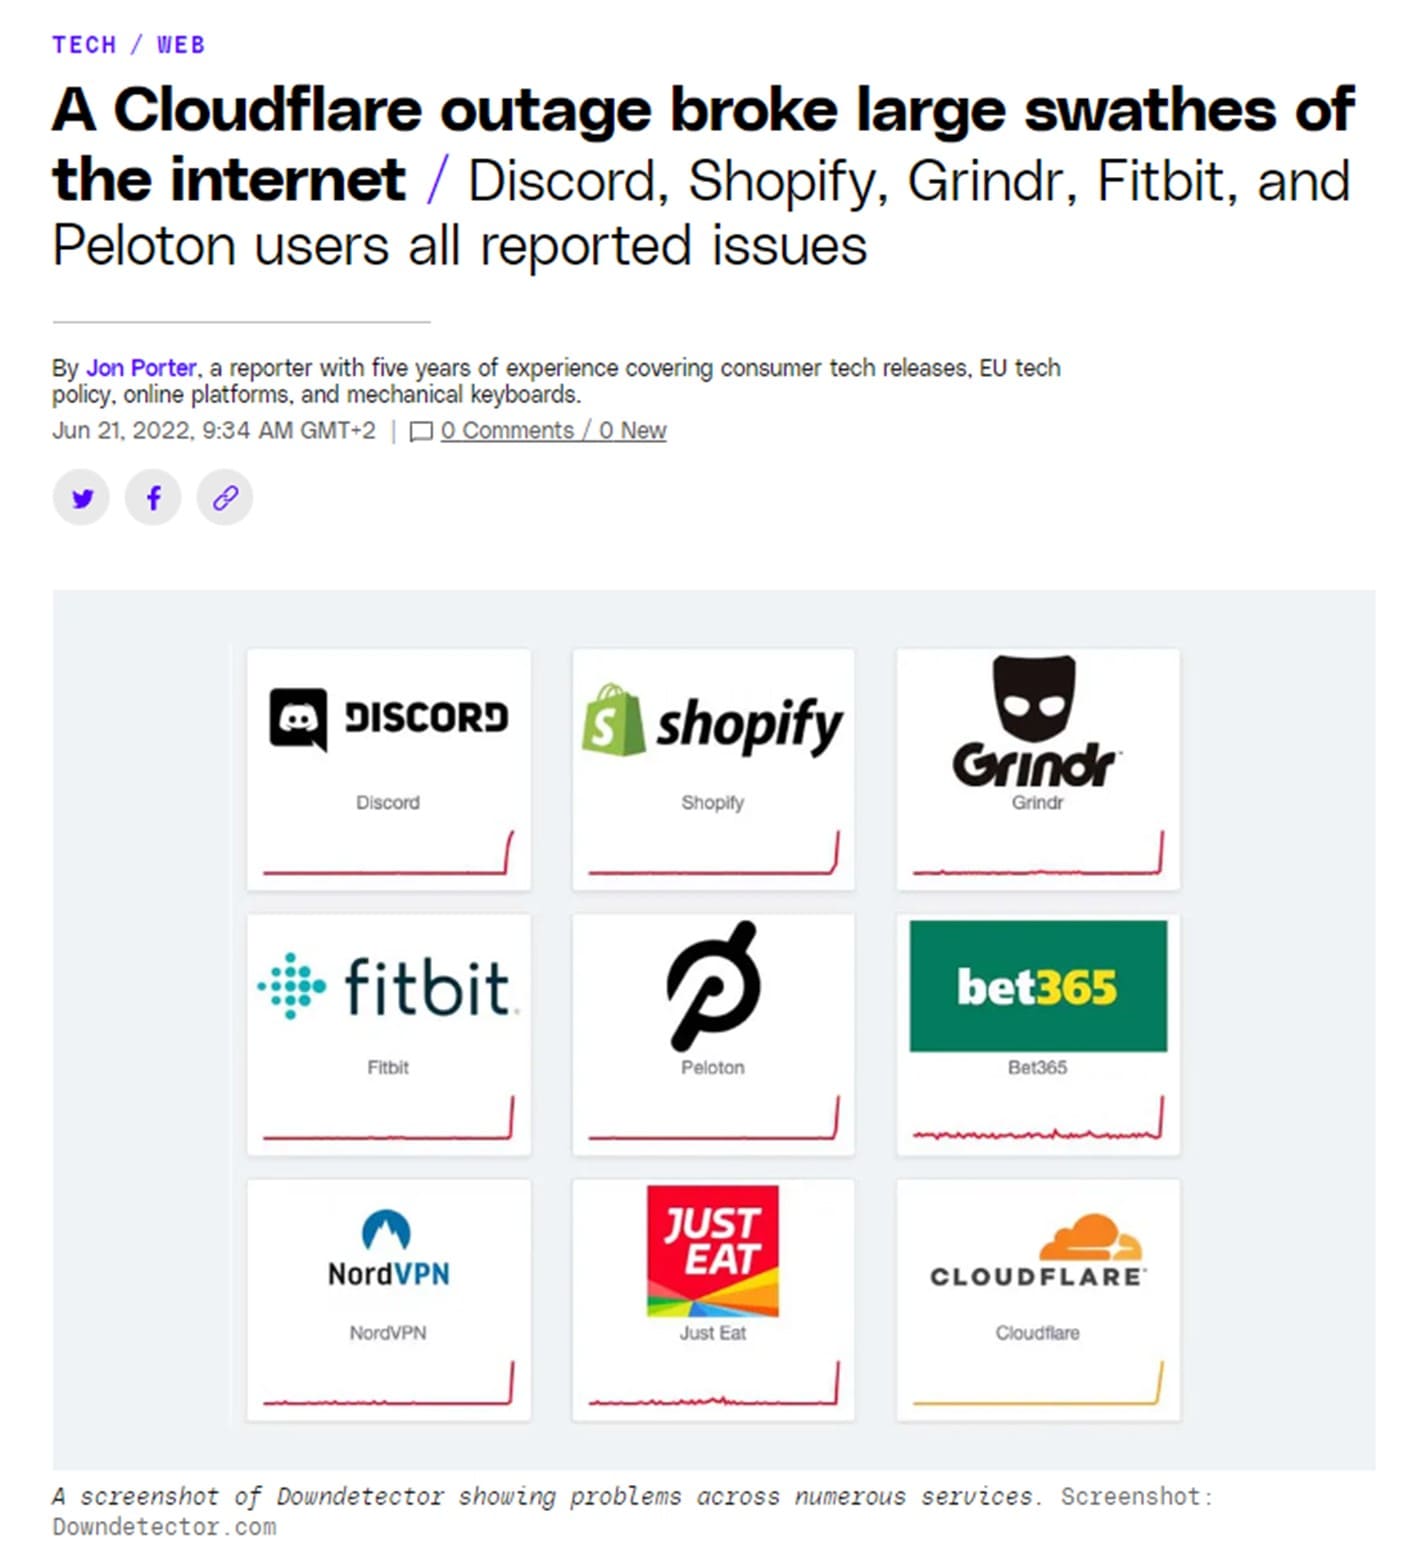 News article about the Cloudflare outage taking down major websites